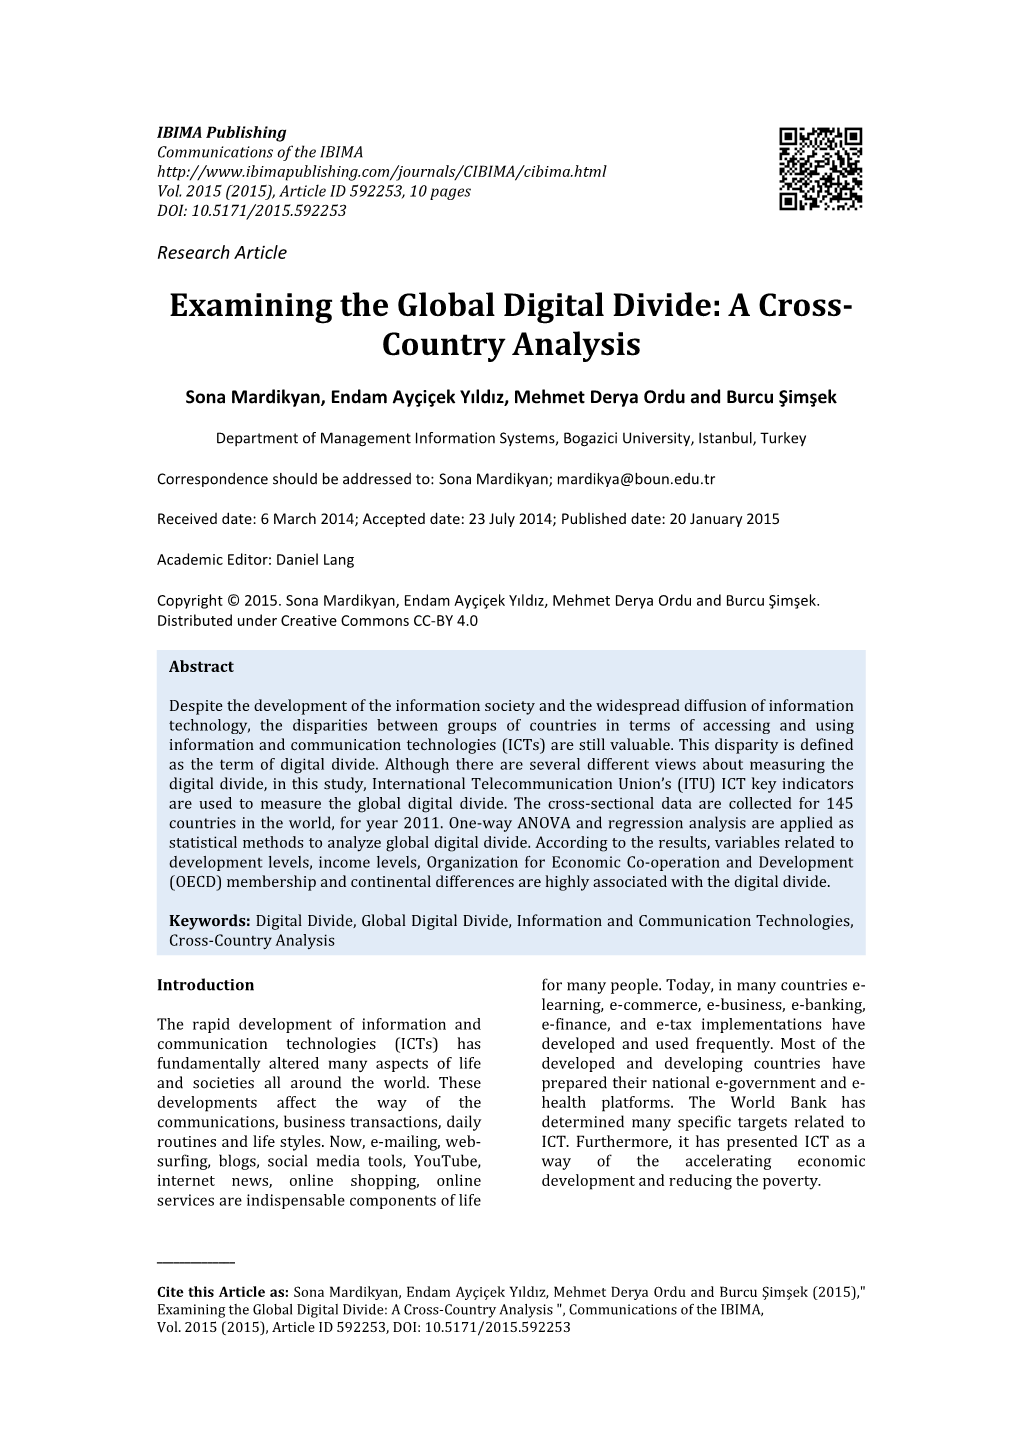 Examining the Global Digital Divide: a Cross- Country Analysis